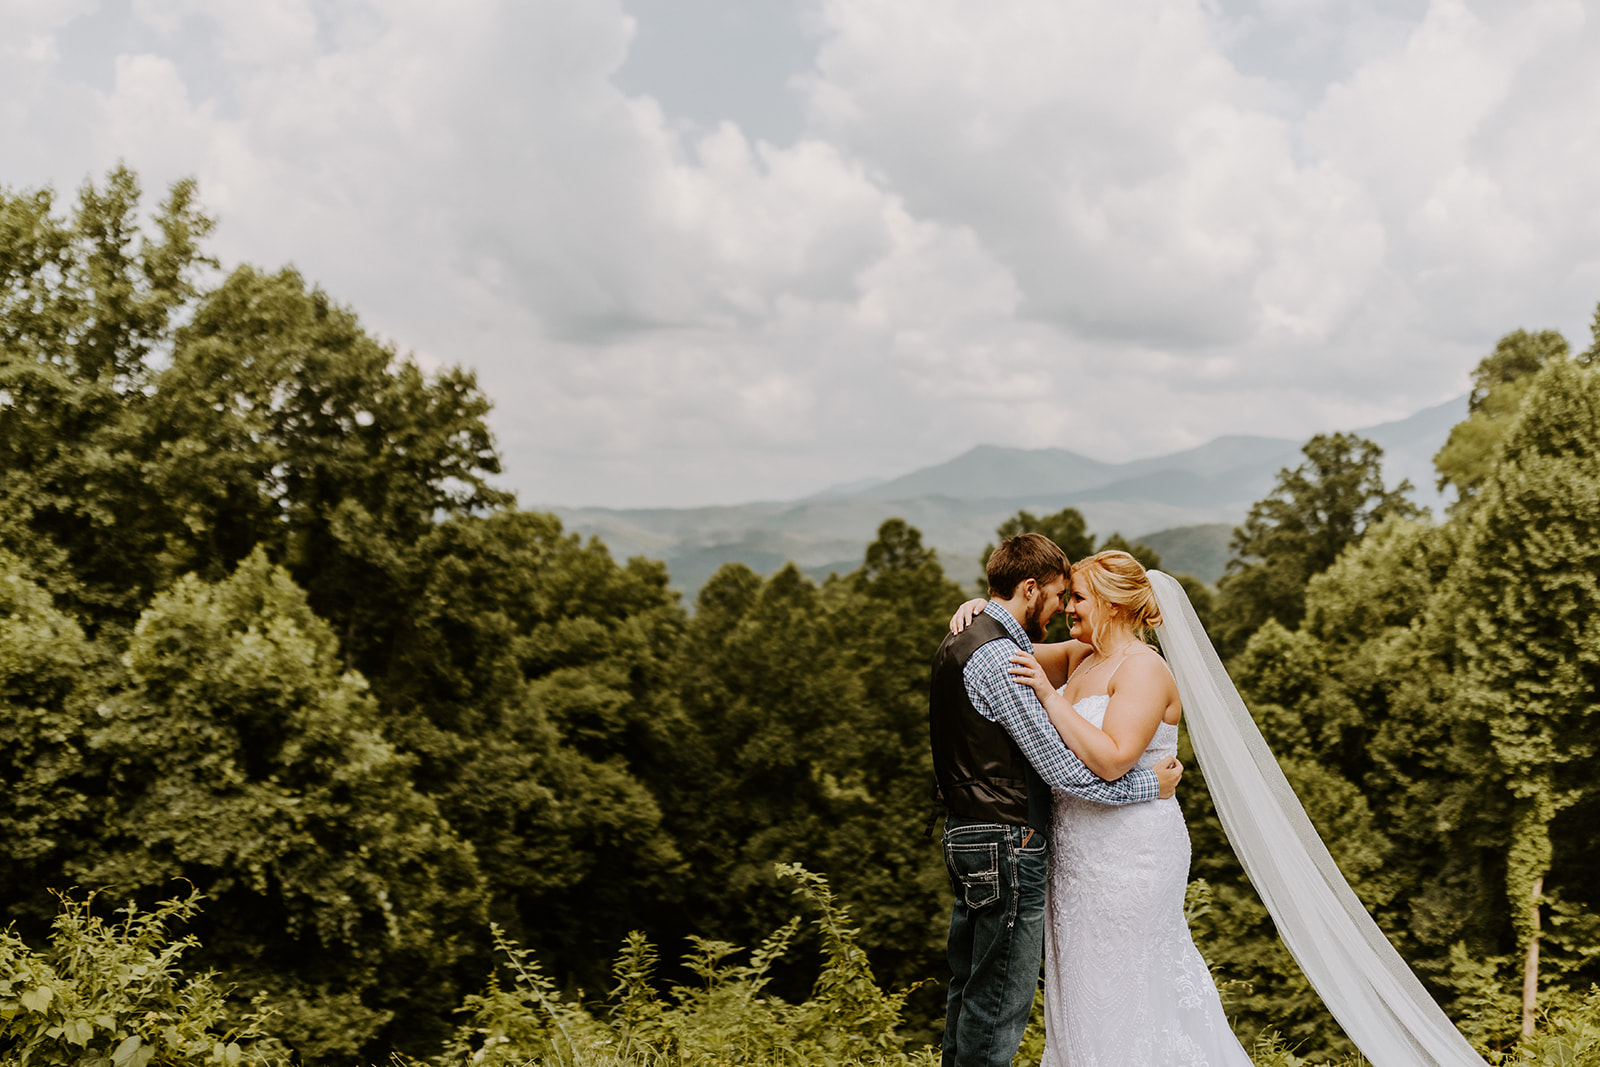 Savannah and Drew scratched their big wedding plans and chose to elope in the Smoky Mountains instead, getting their portraits done in front of these gorgeous mountains.